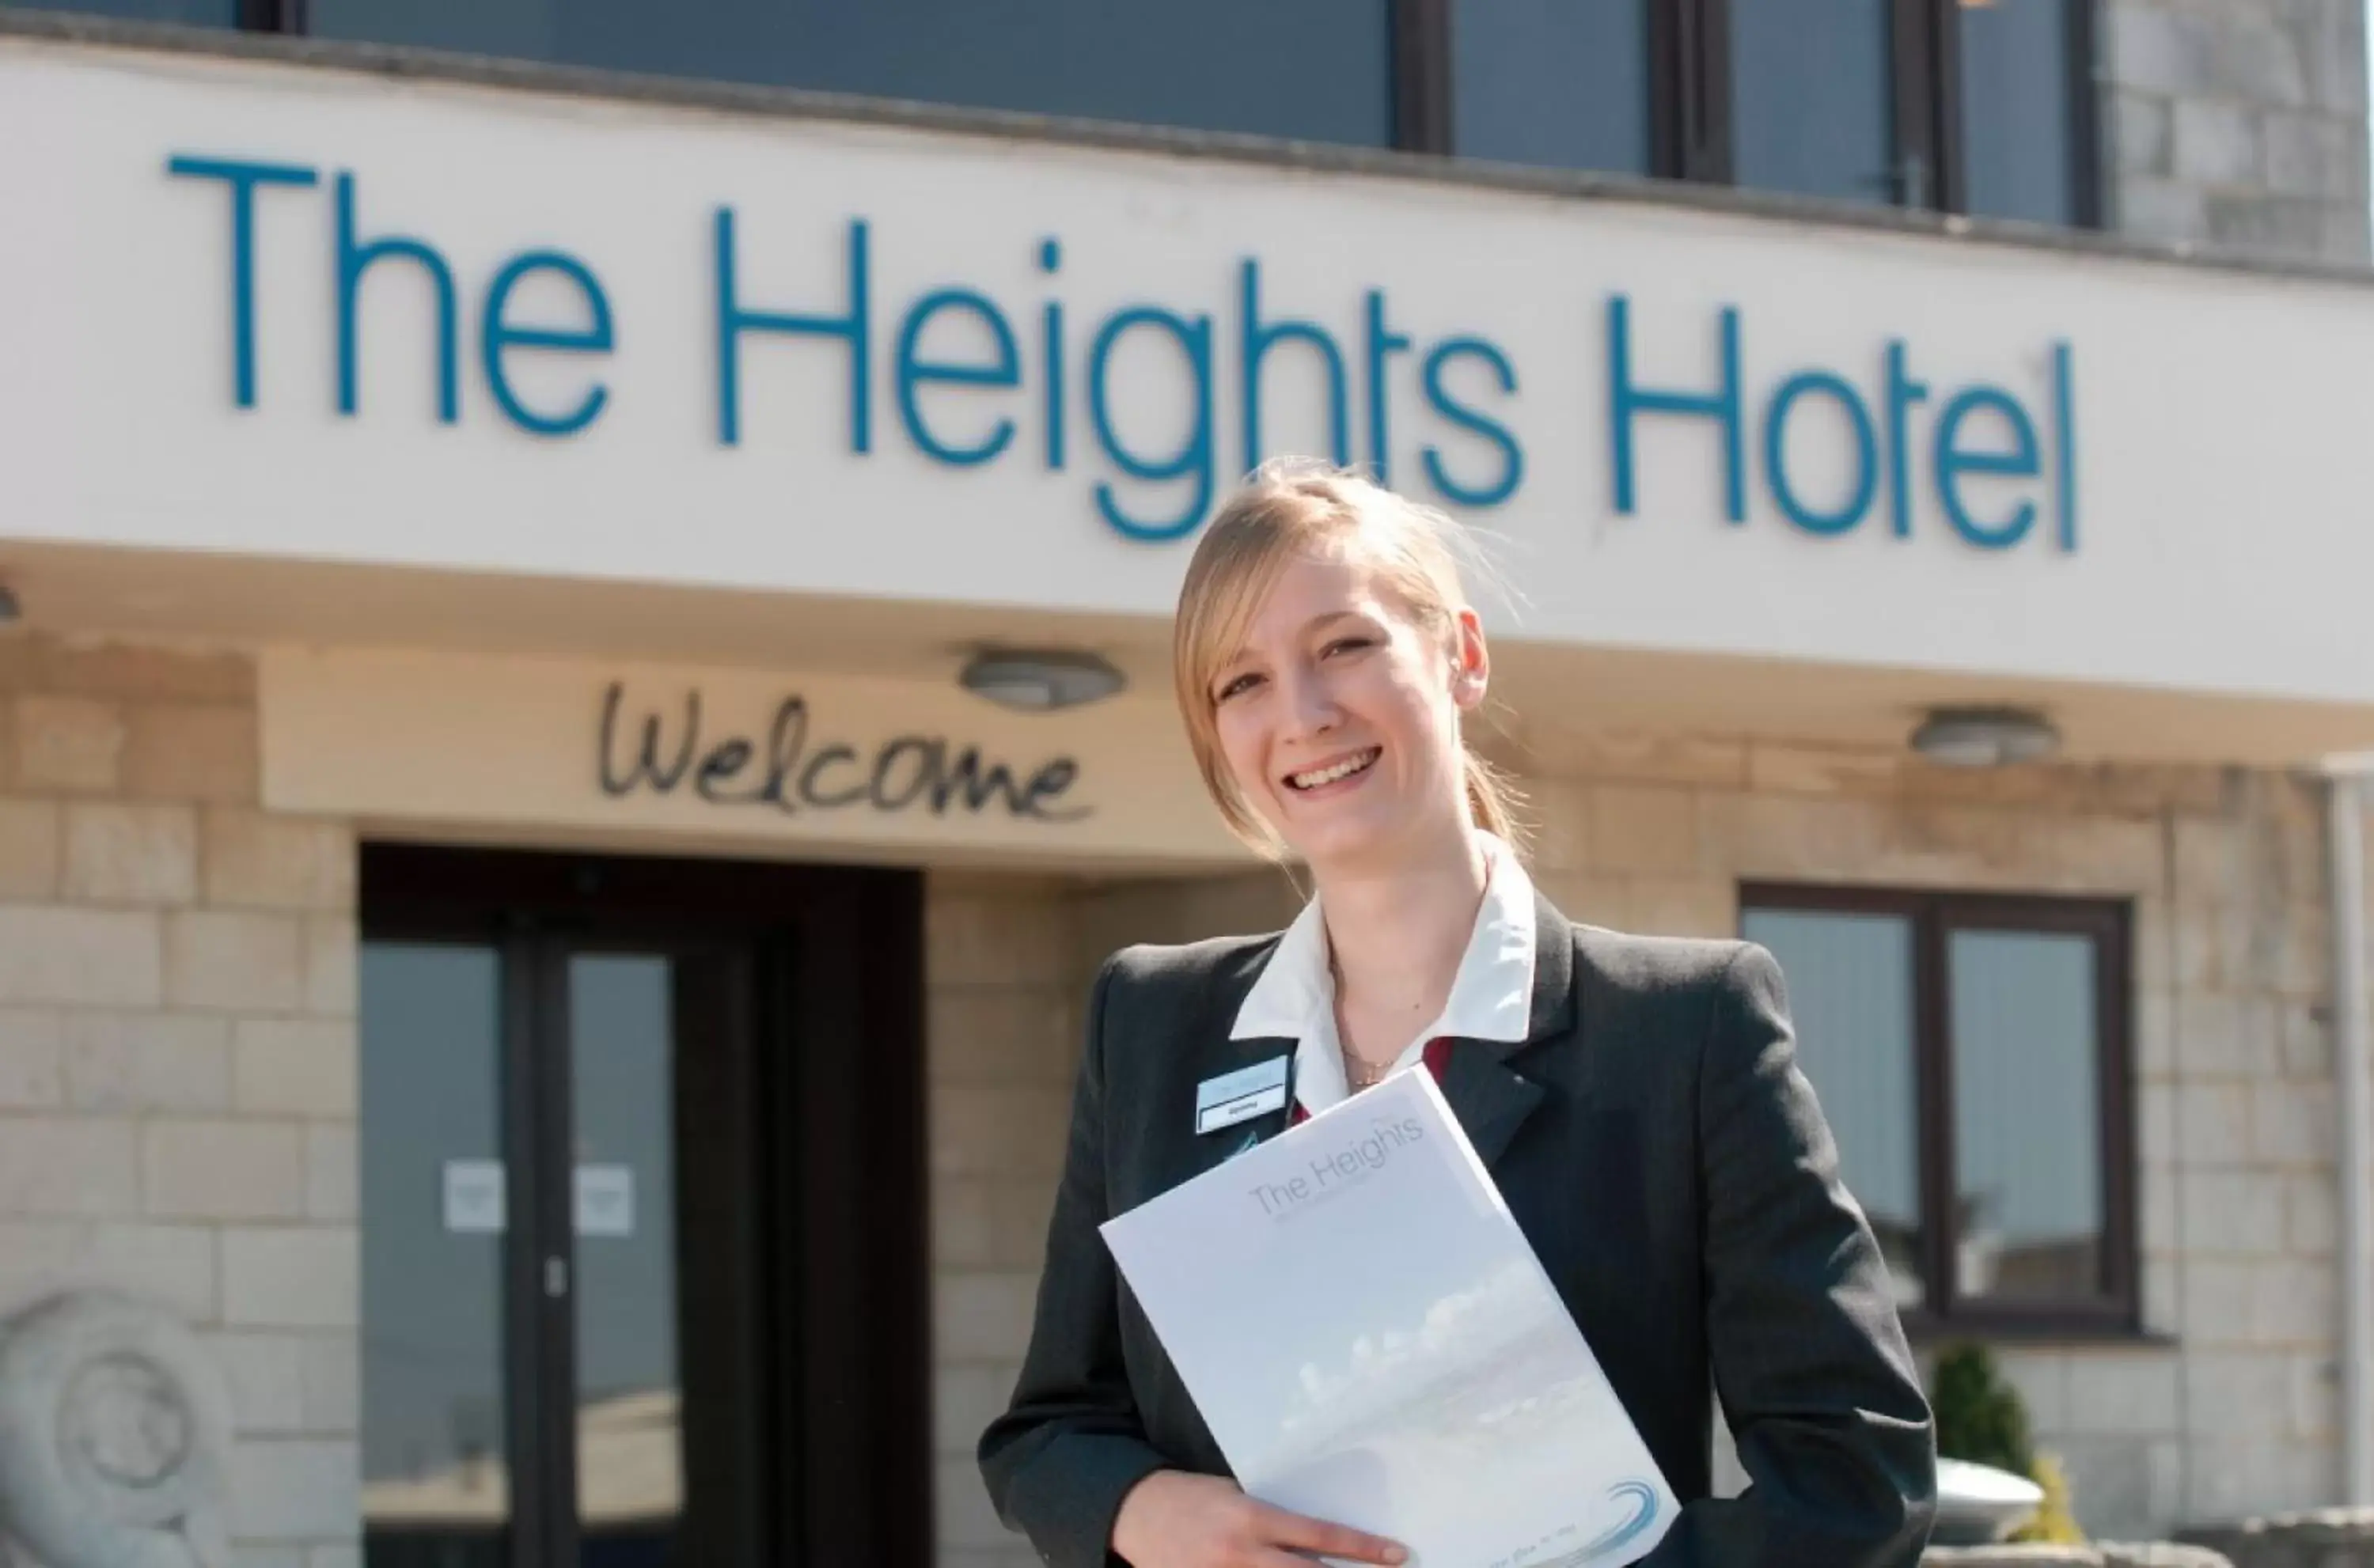 Staff in Heights Hotel